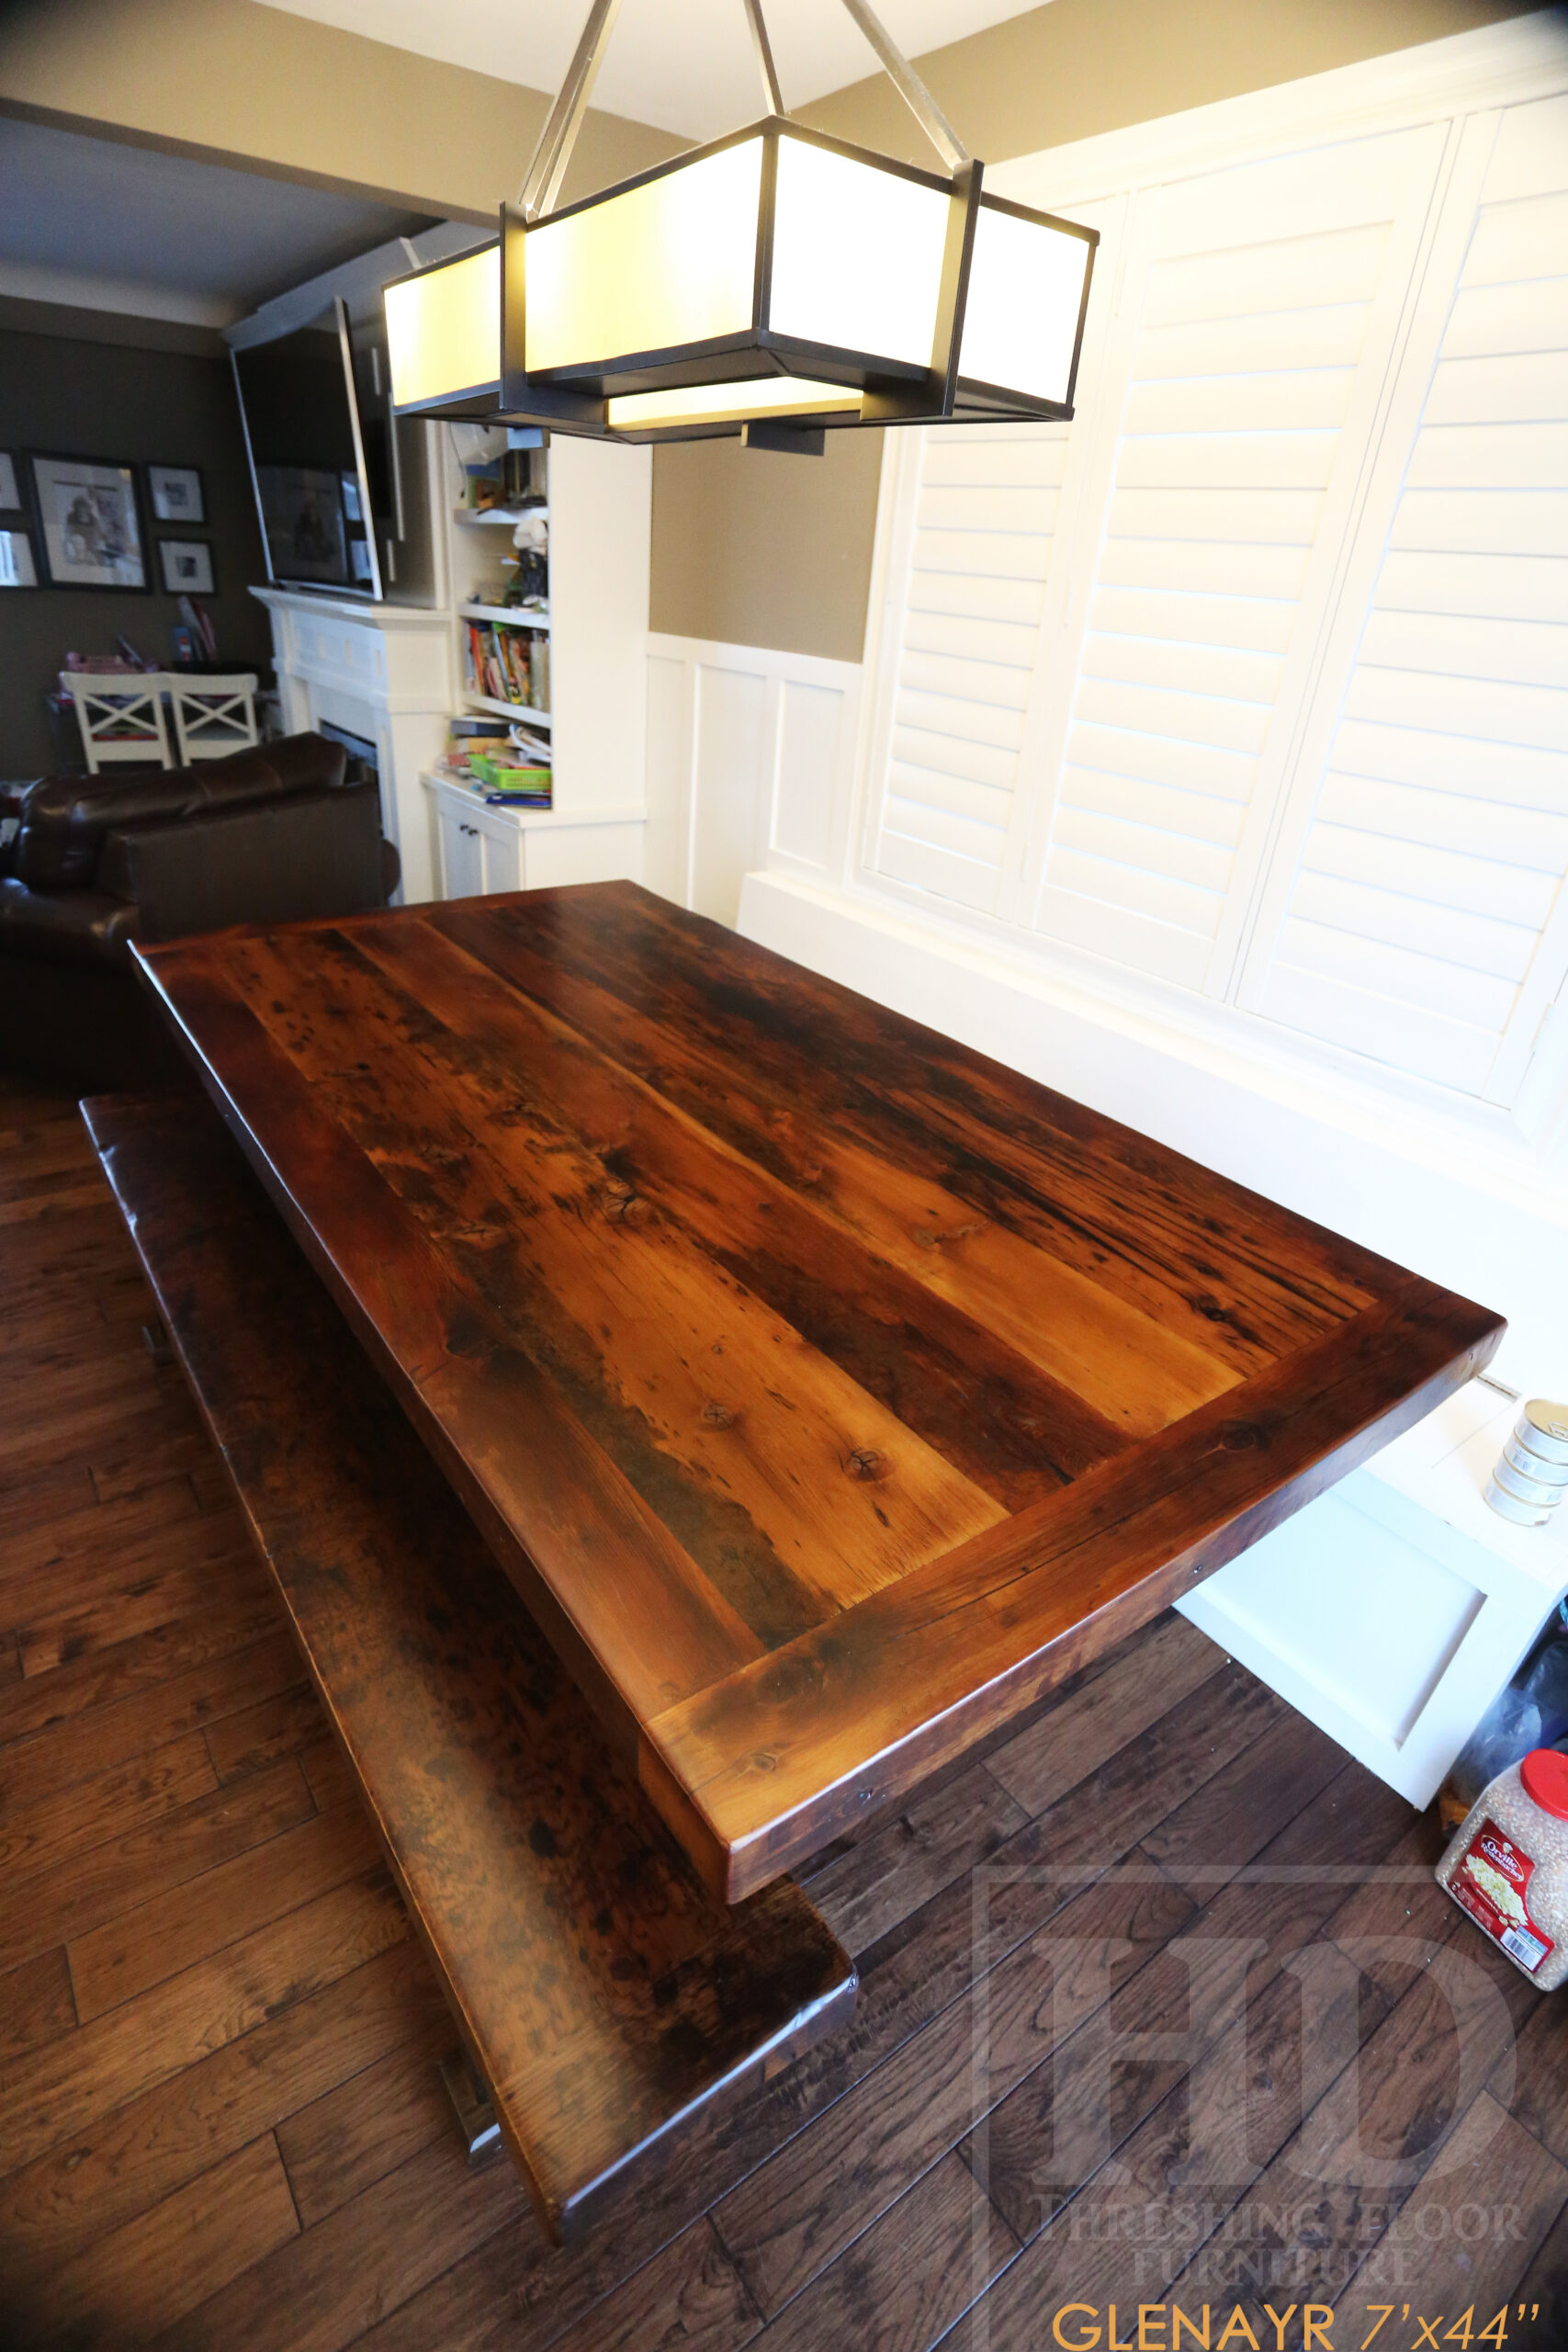 Project details: 7' Reclaimed Ontario Barnwood Table we made for a Welland, Ontario home - 44" wide – Beam Option Sawbuck Base – Extra Thick 3” Joist Material Top - Reclaimed Old Growth Hemlock Threshing Floor Construction – Bread edge Ends - Original edges & distressing maintained - Premium epoxy + satin polyurethane finish – 7’ [matching] Trestle Bench – 2 Strongback Chairs / Wormy Maple / Polyurethane Clearcoat Finish - www.table.ca